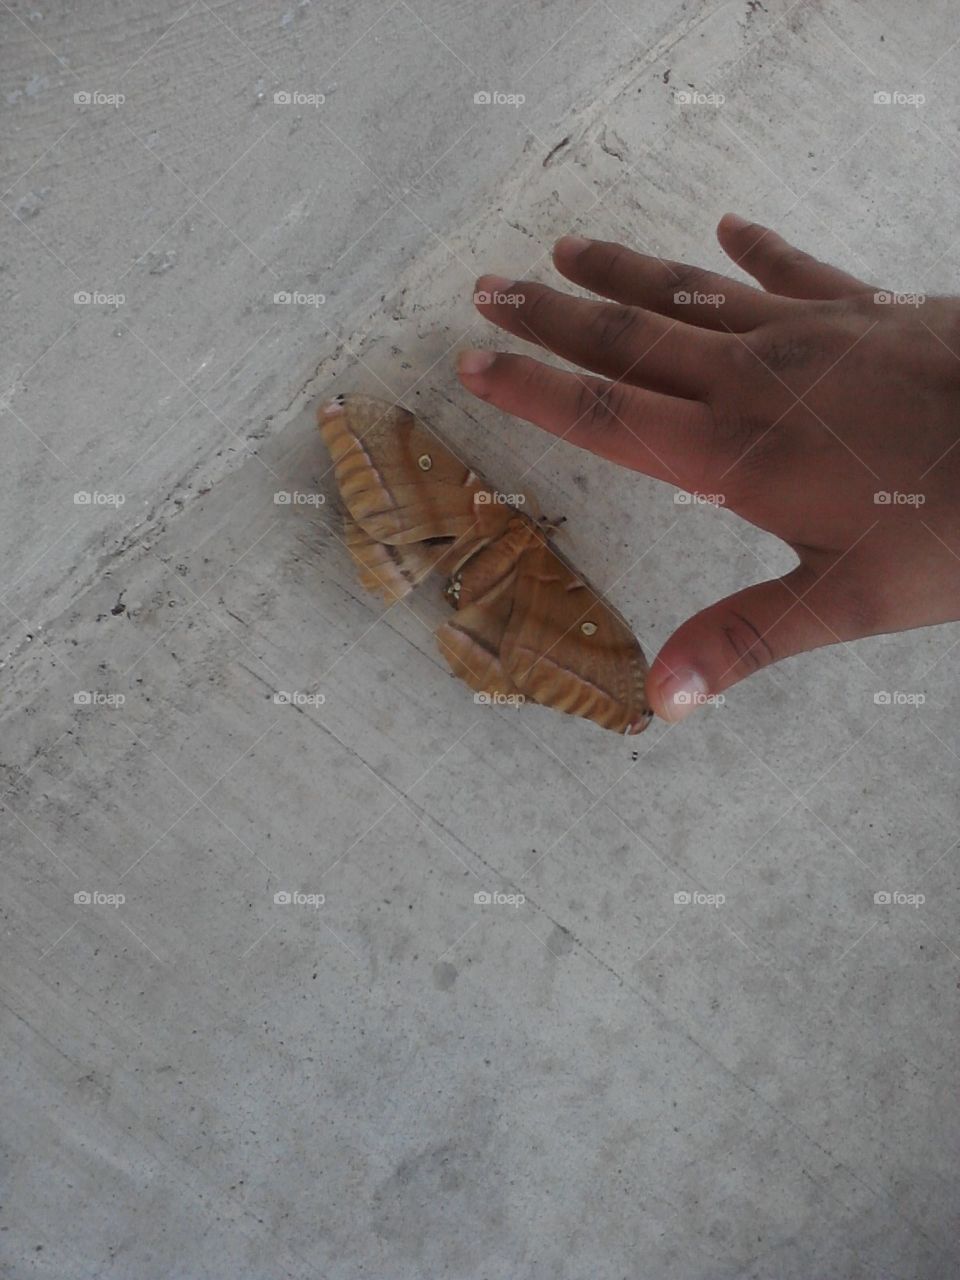 Giant moth with a hand next to it for size comparison